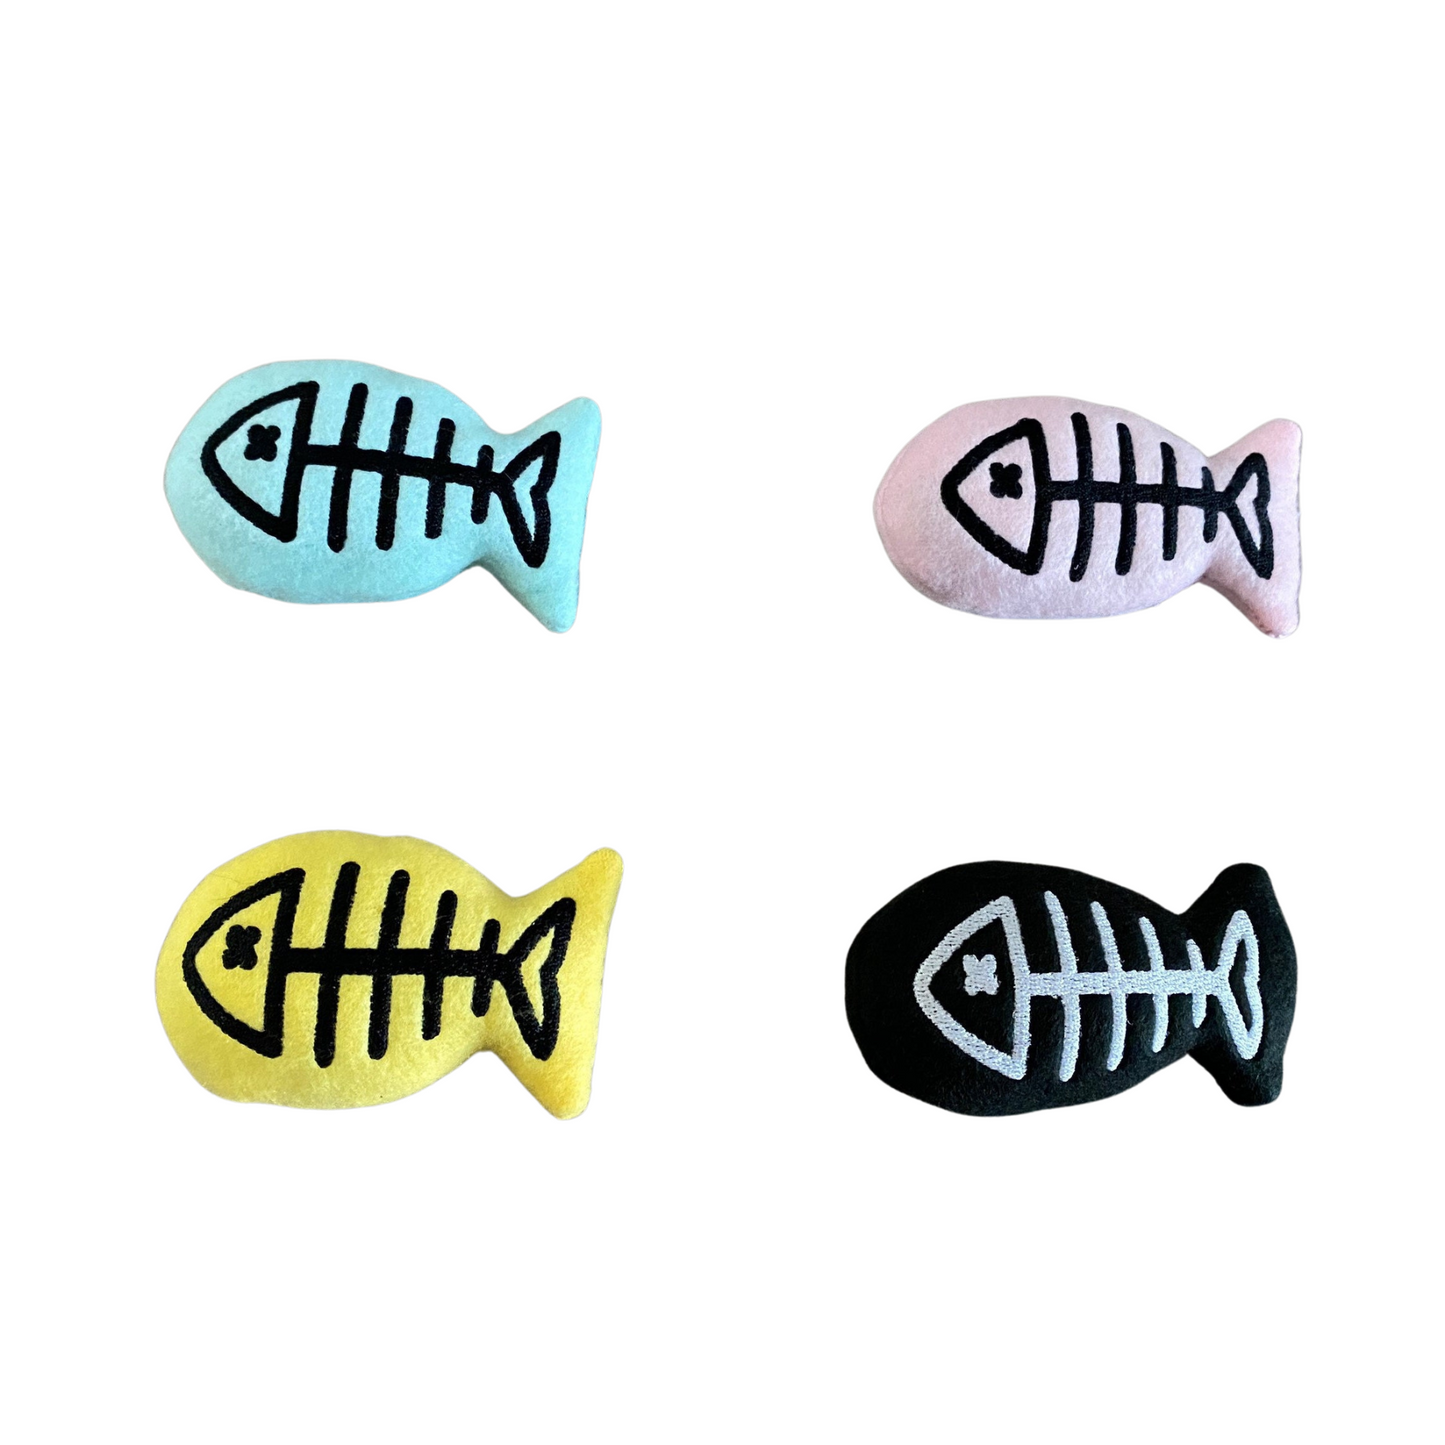 Fish Skeleton Cat Toy - Catnip Toy Cat Toys 4 pack (one of each)  